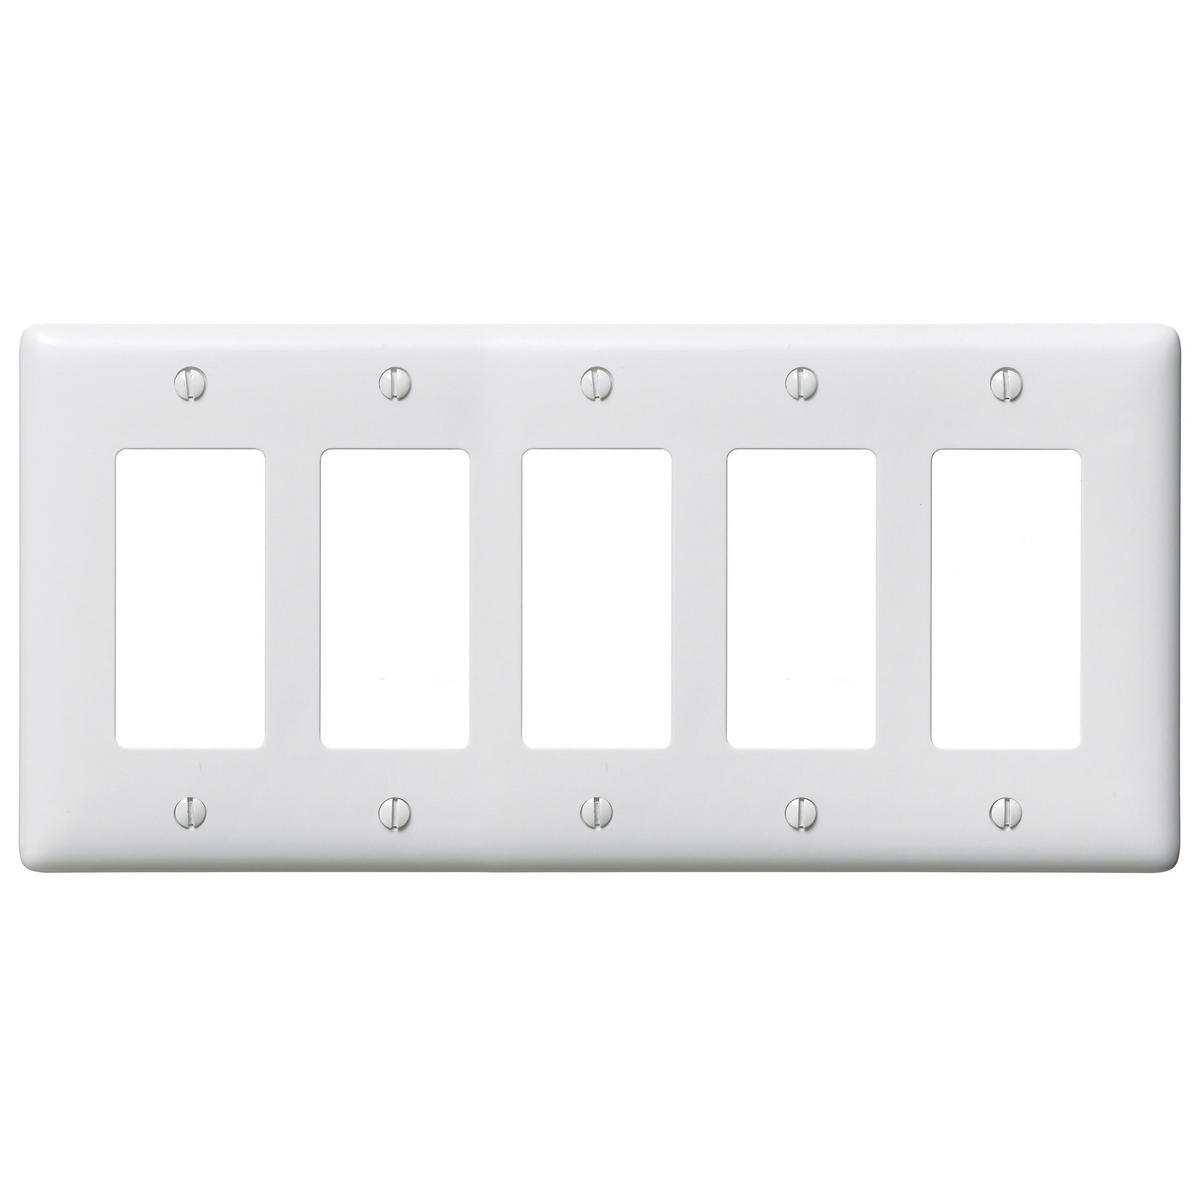 Hubbell NP265W Wallplates and Box Covers, Wallplate, Nylon, 5-Gang, 5) Decorator, White  ; Reinforcement ribs for extra strength ; High-impact, self-extinguishing nylon material ; Captive screw feature holds mounting screw in place ; Standard Size is 1/8" larger to give